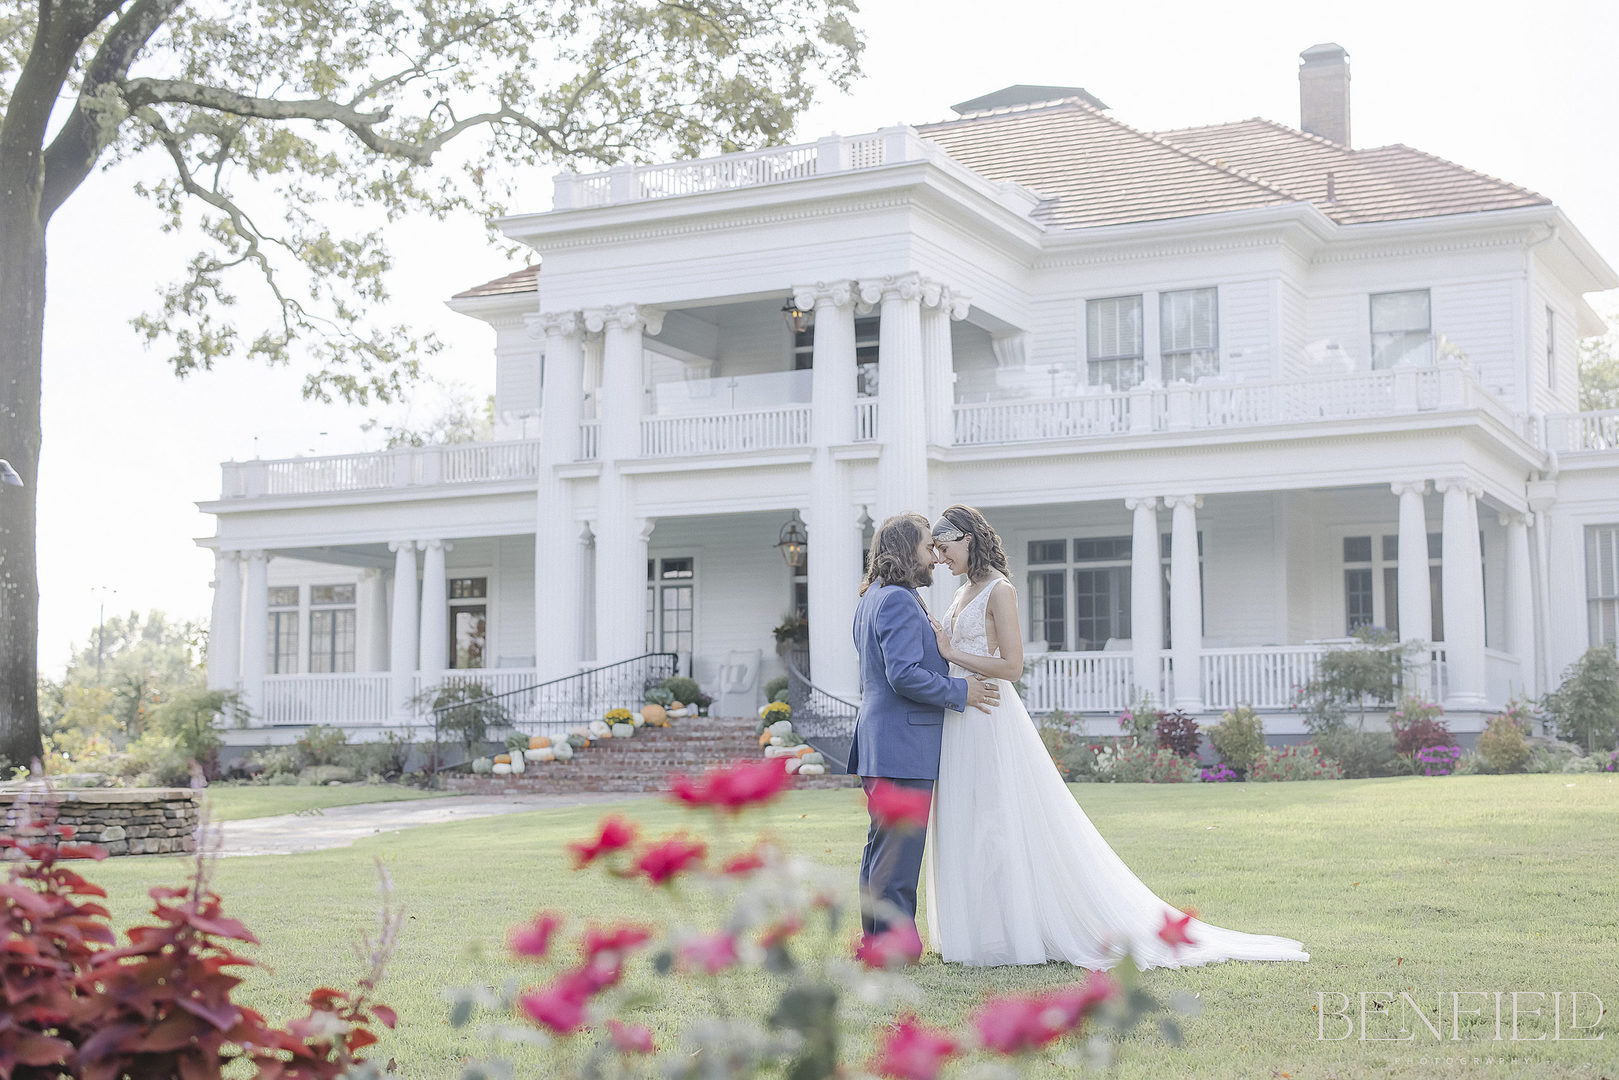 Wedding at The Reserve in Hot Springs shows the bride and groom in front of the mansion